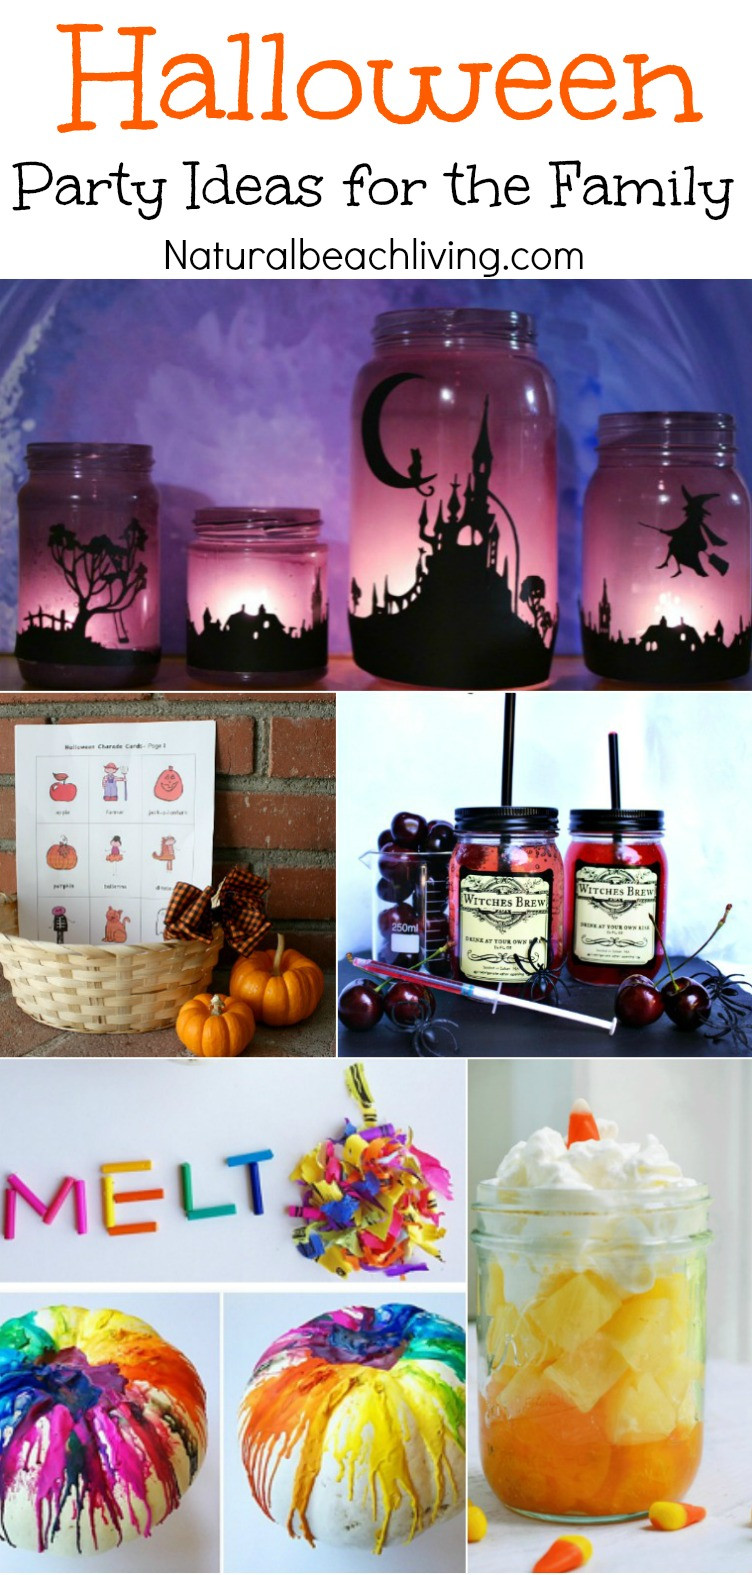 Family Halloween Party Ideas
 The Ultimate Halloween Party Ideas for the Family